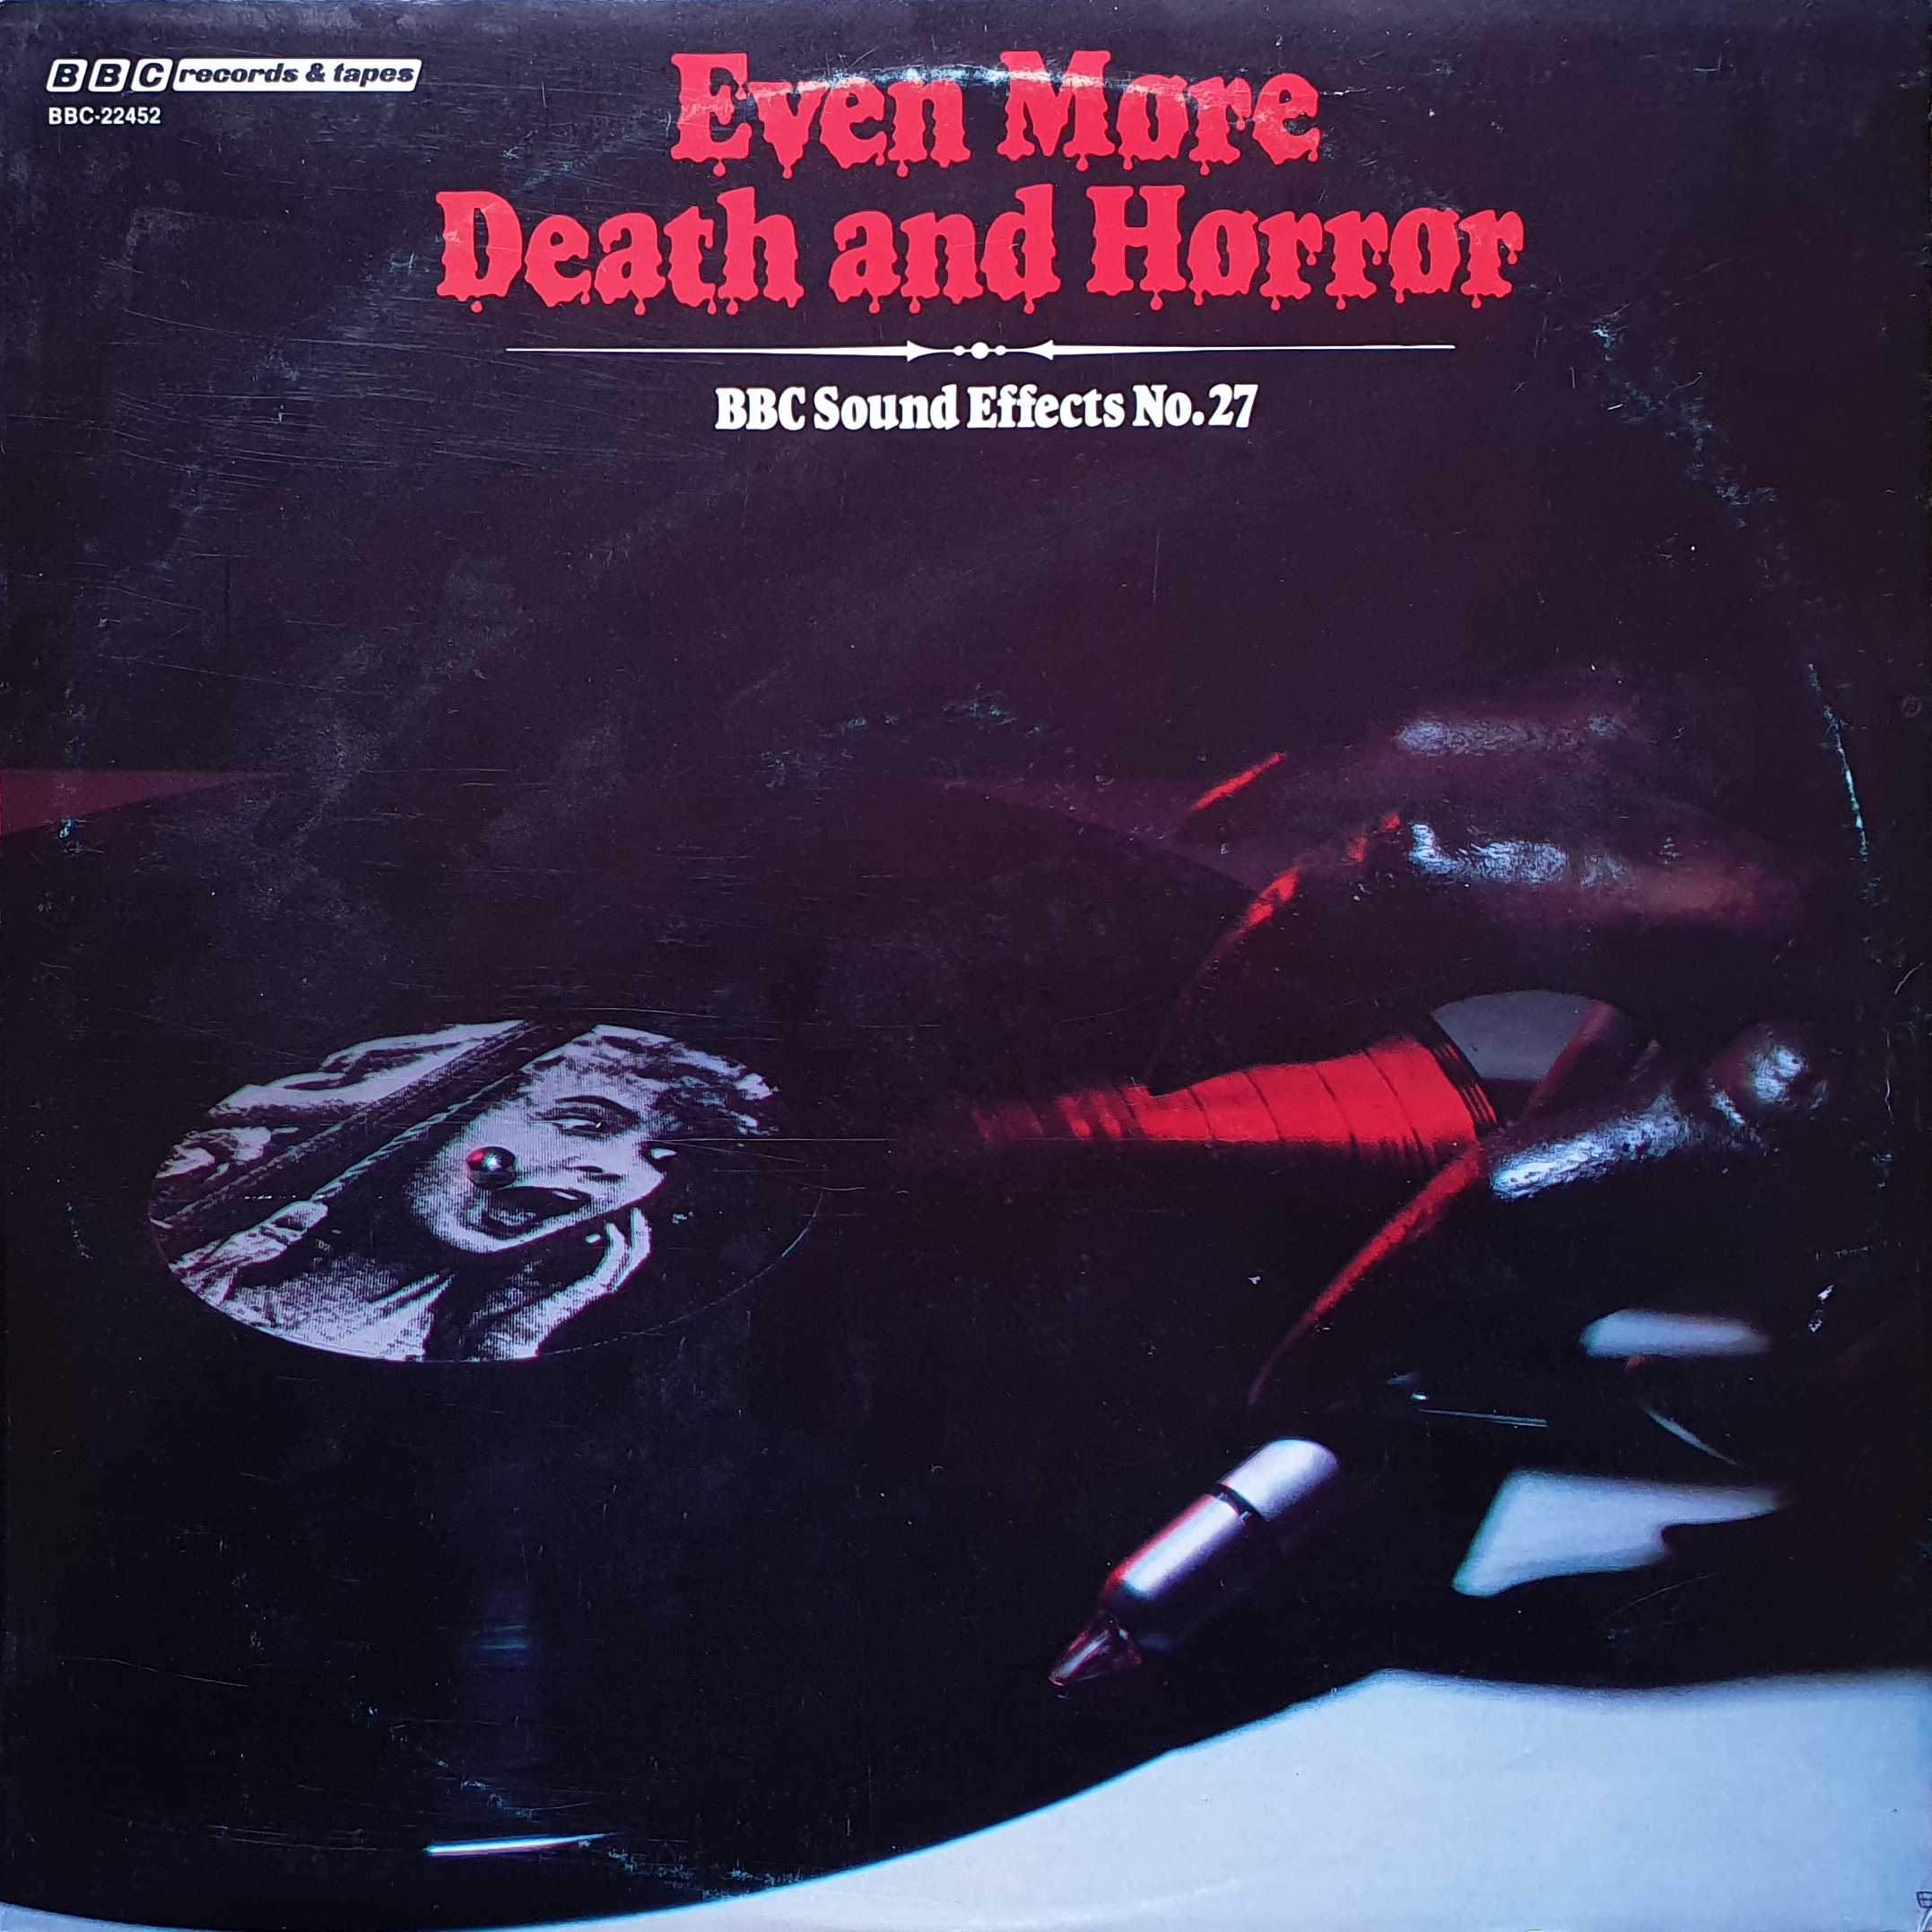 Picture of BBC - 22452 Even more death and horror by artist Various from the BBC albums - Records and Tapes library